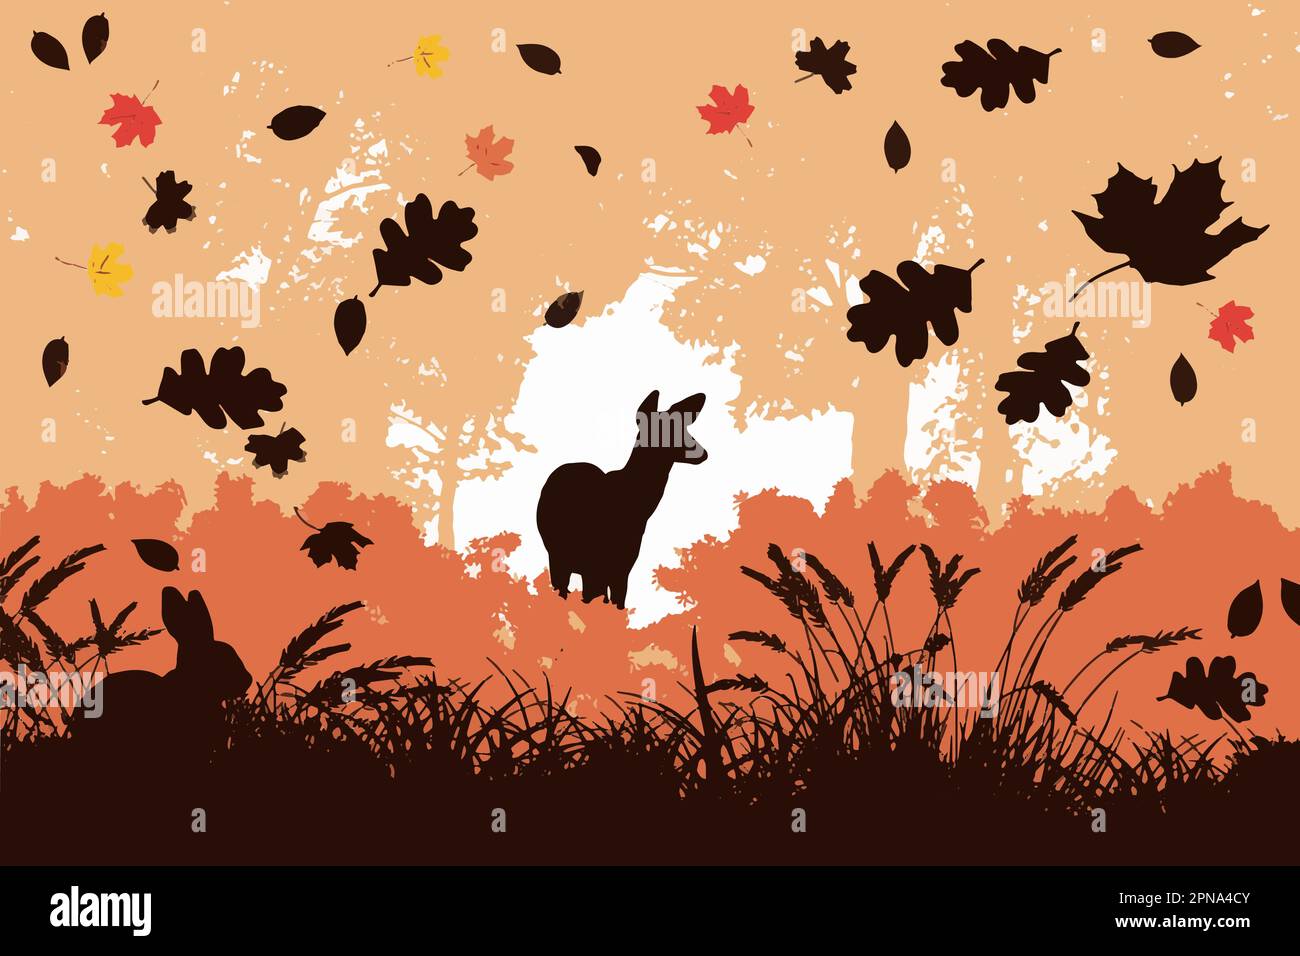 A deer is seen in autumn with falling leaves, trees, grasses and a rabbit in a vector graphic design. Stock Vector